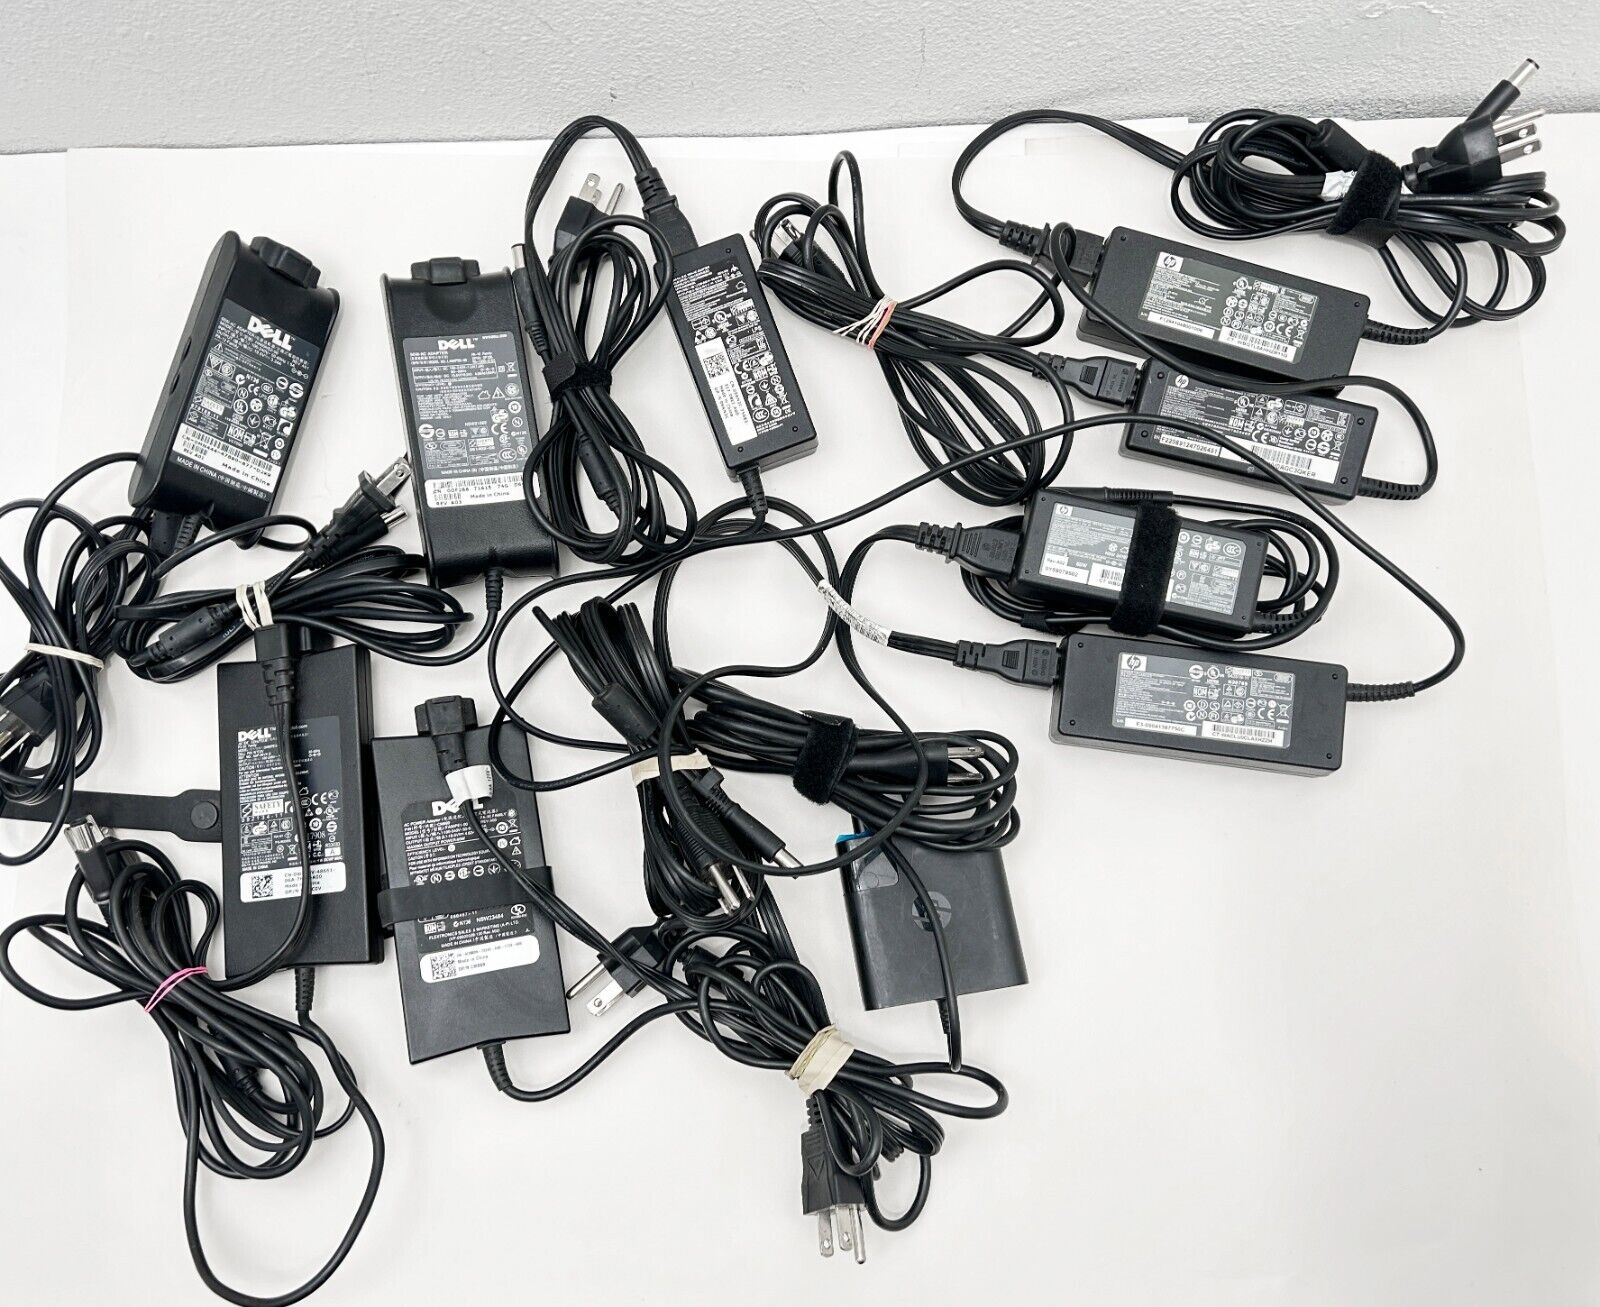 LOT OF 10 Various Dell & HP Laptop Chargers 19V, 19.5V OEM Power Supply Adapters